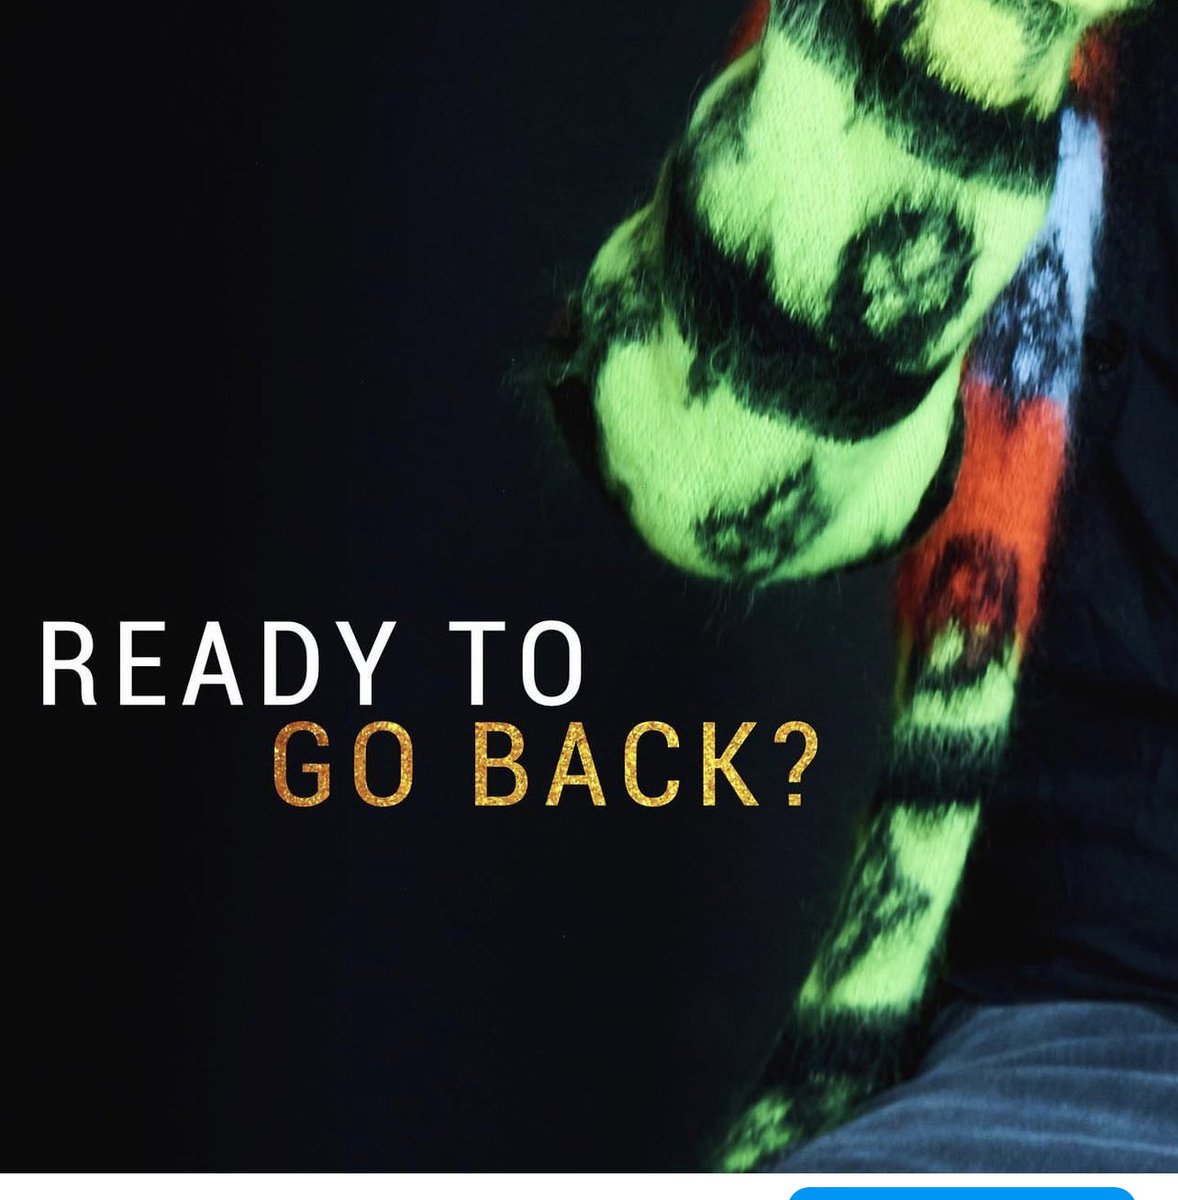 Ready to go back? ….stay tuned